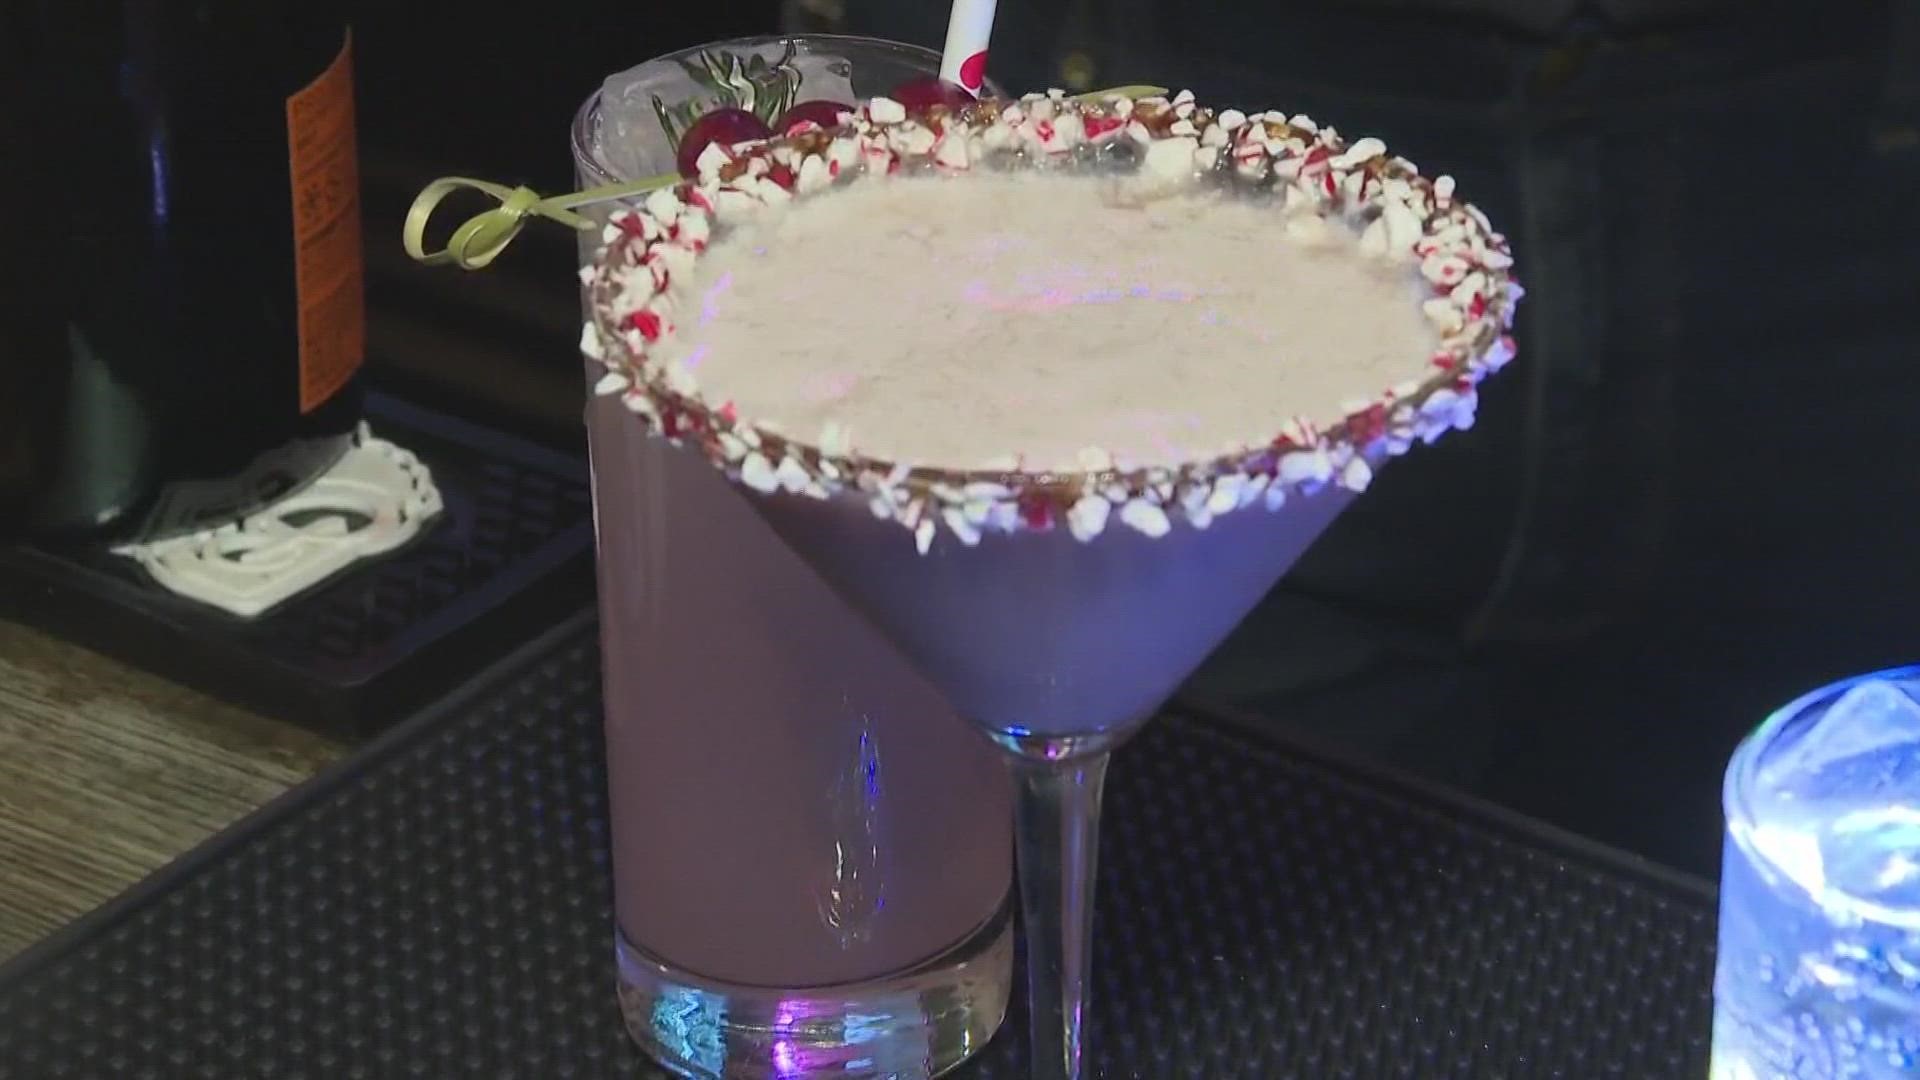 Holiday pop up bars are becoming more popular here in Northeast Ohio! Stephanie Haney has the latest one in North Olmsted.